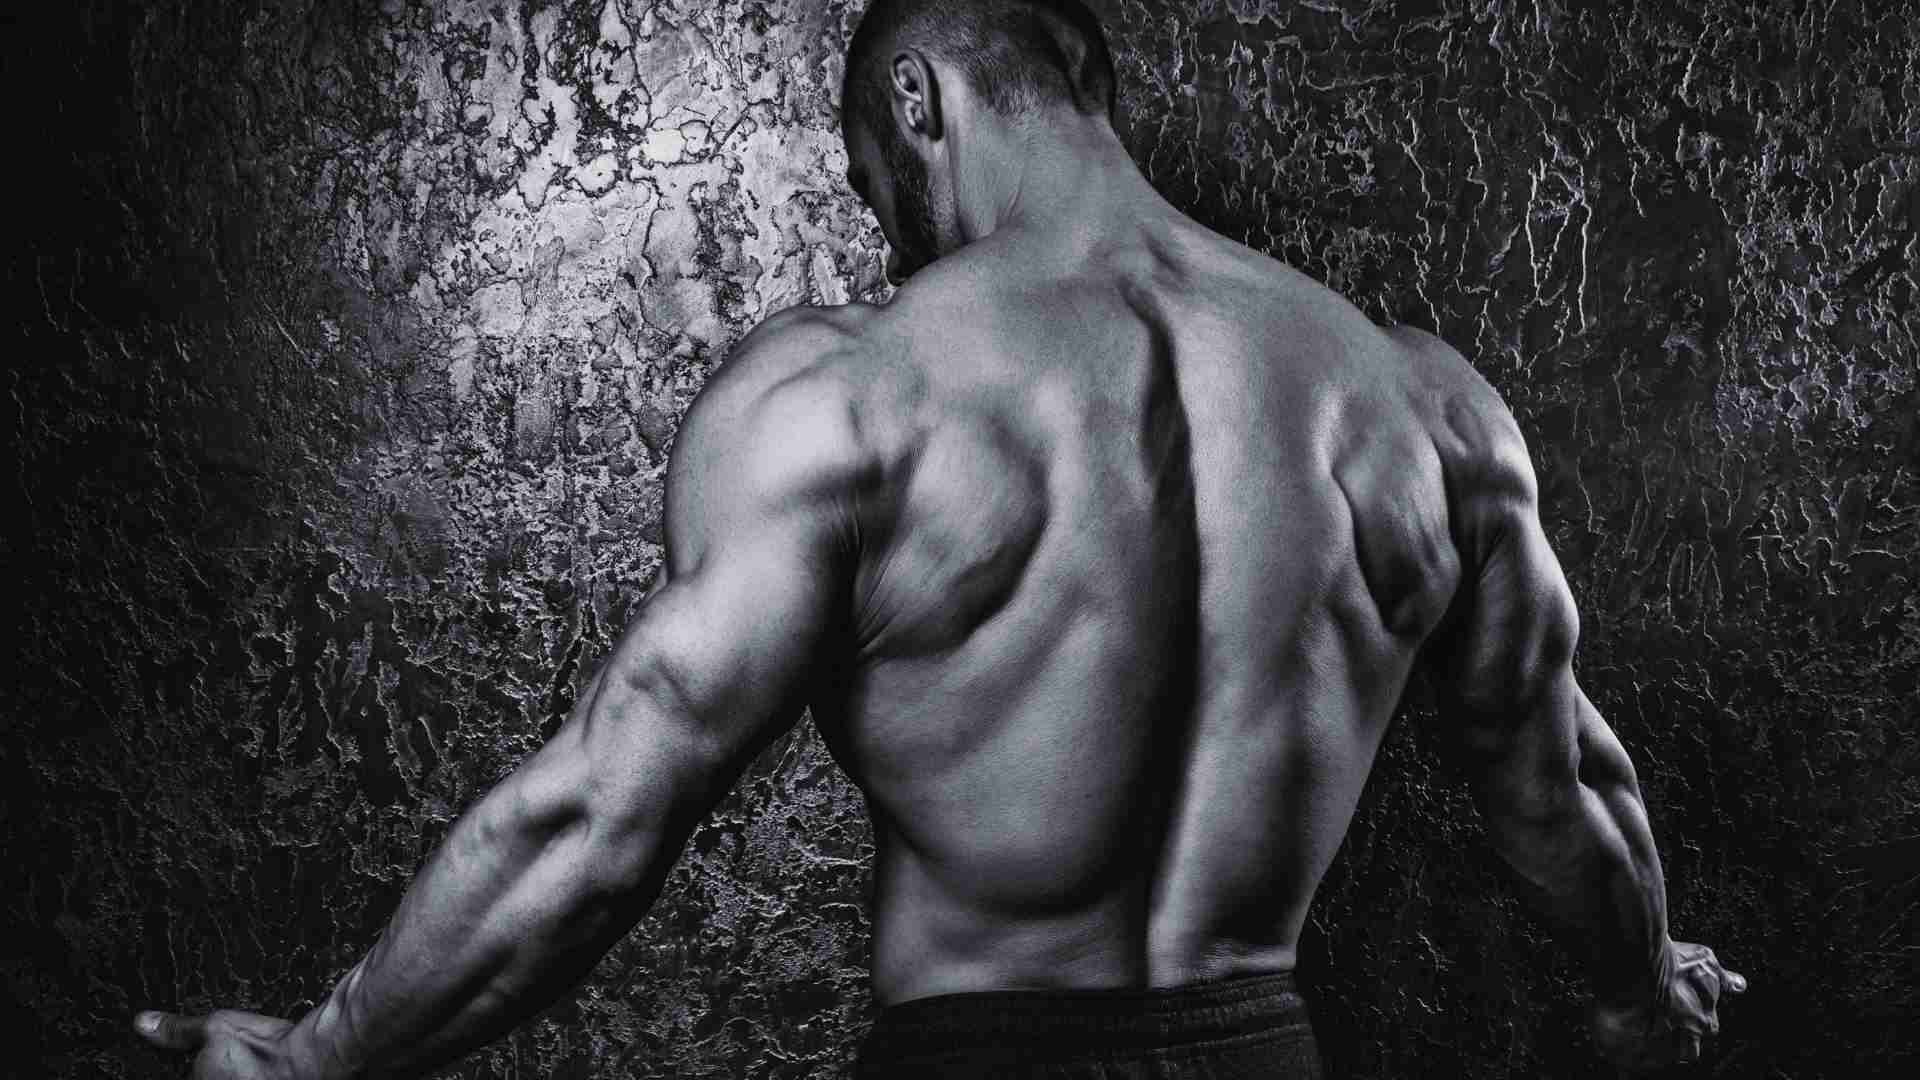 Dorian Yates on X: To build a wide back you gotta pull narrow